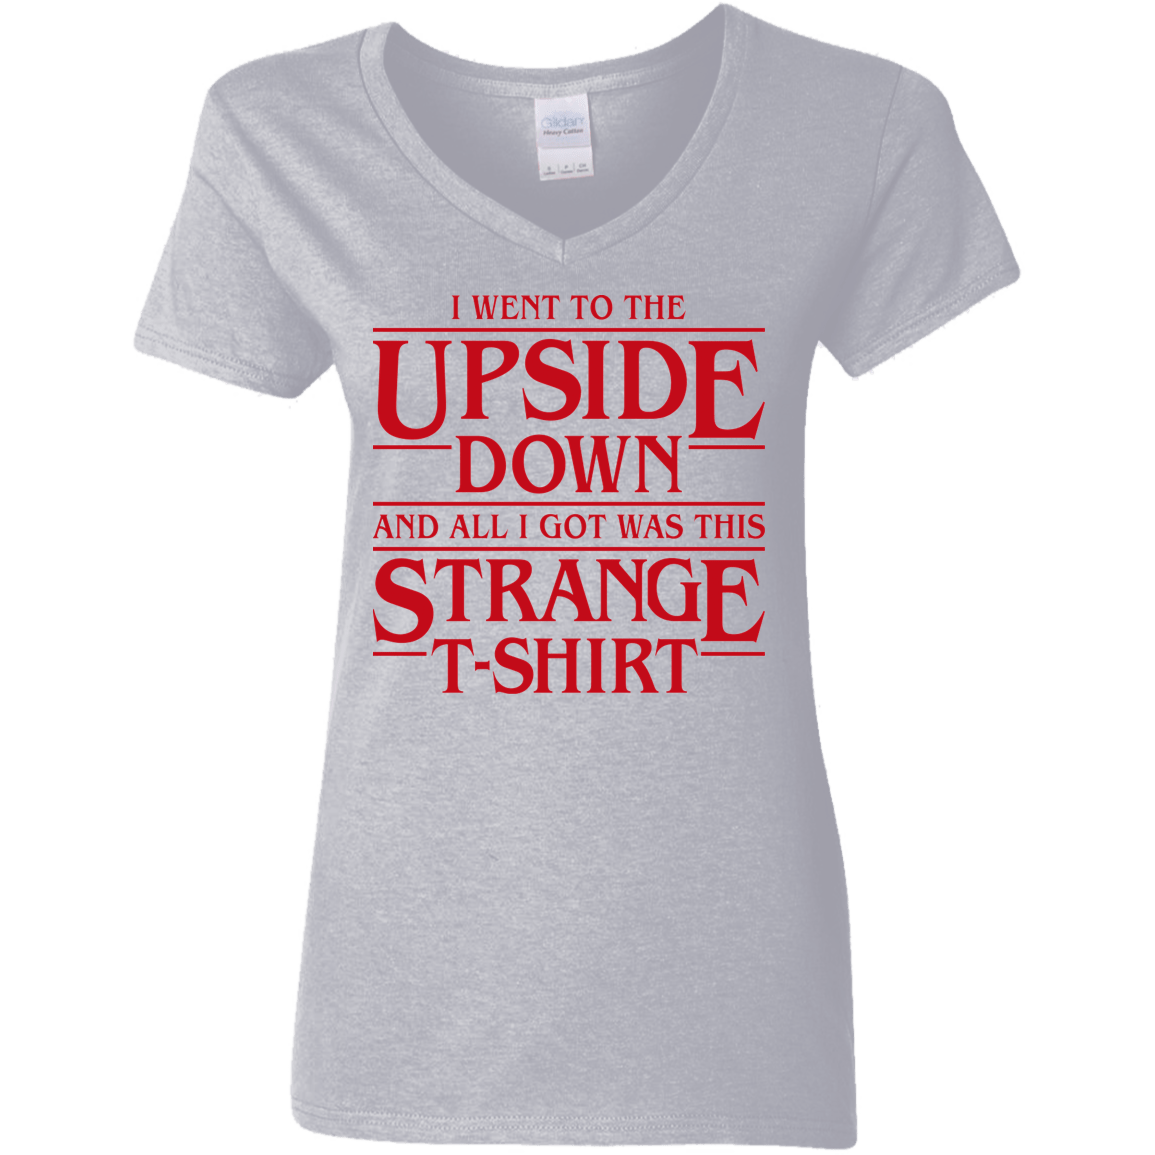 T-Shirts Sport Grey / S I Went to the Upside Down Women's V-Neck T-Shirt